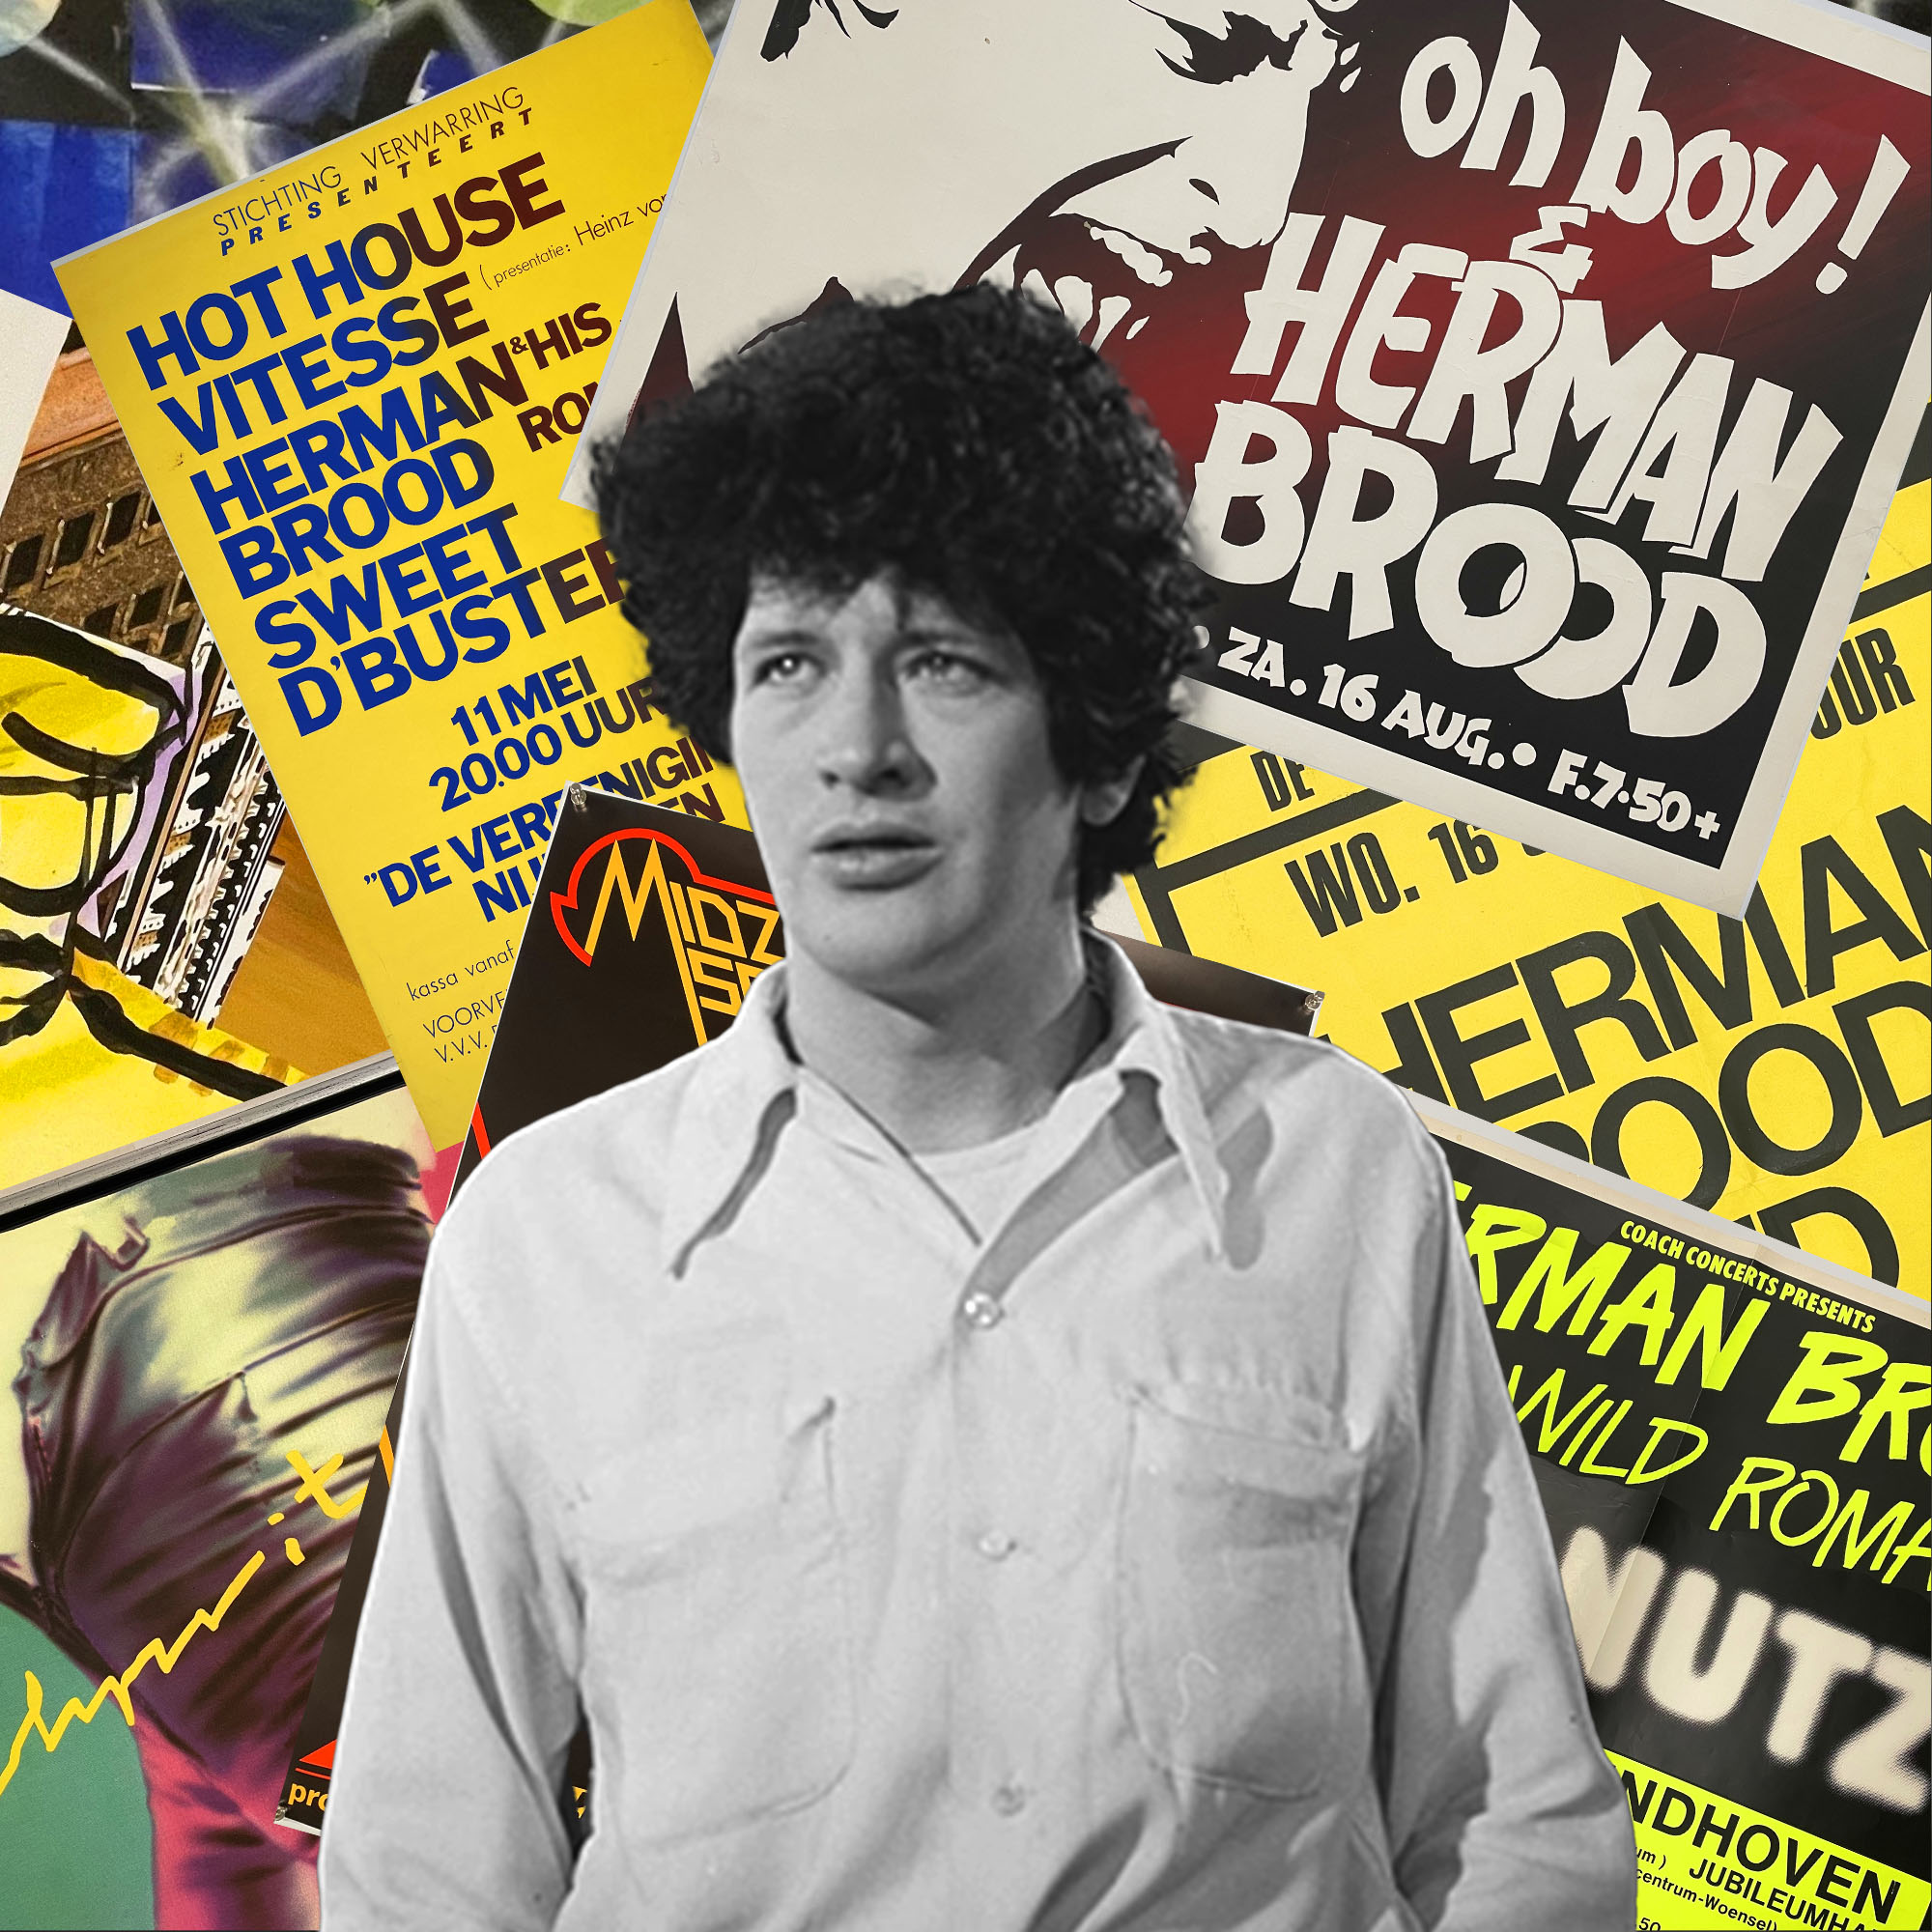 The Herman Brood Collection - Live From Record Planet, Den Bosch 2pm CEST 1pm UK